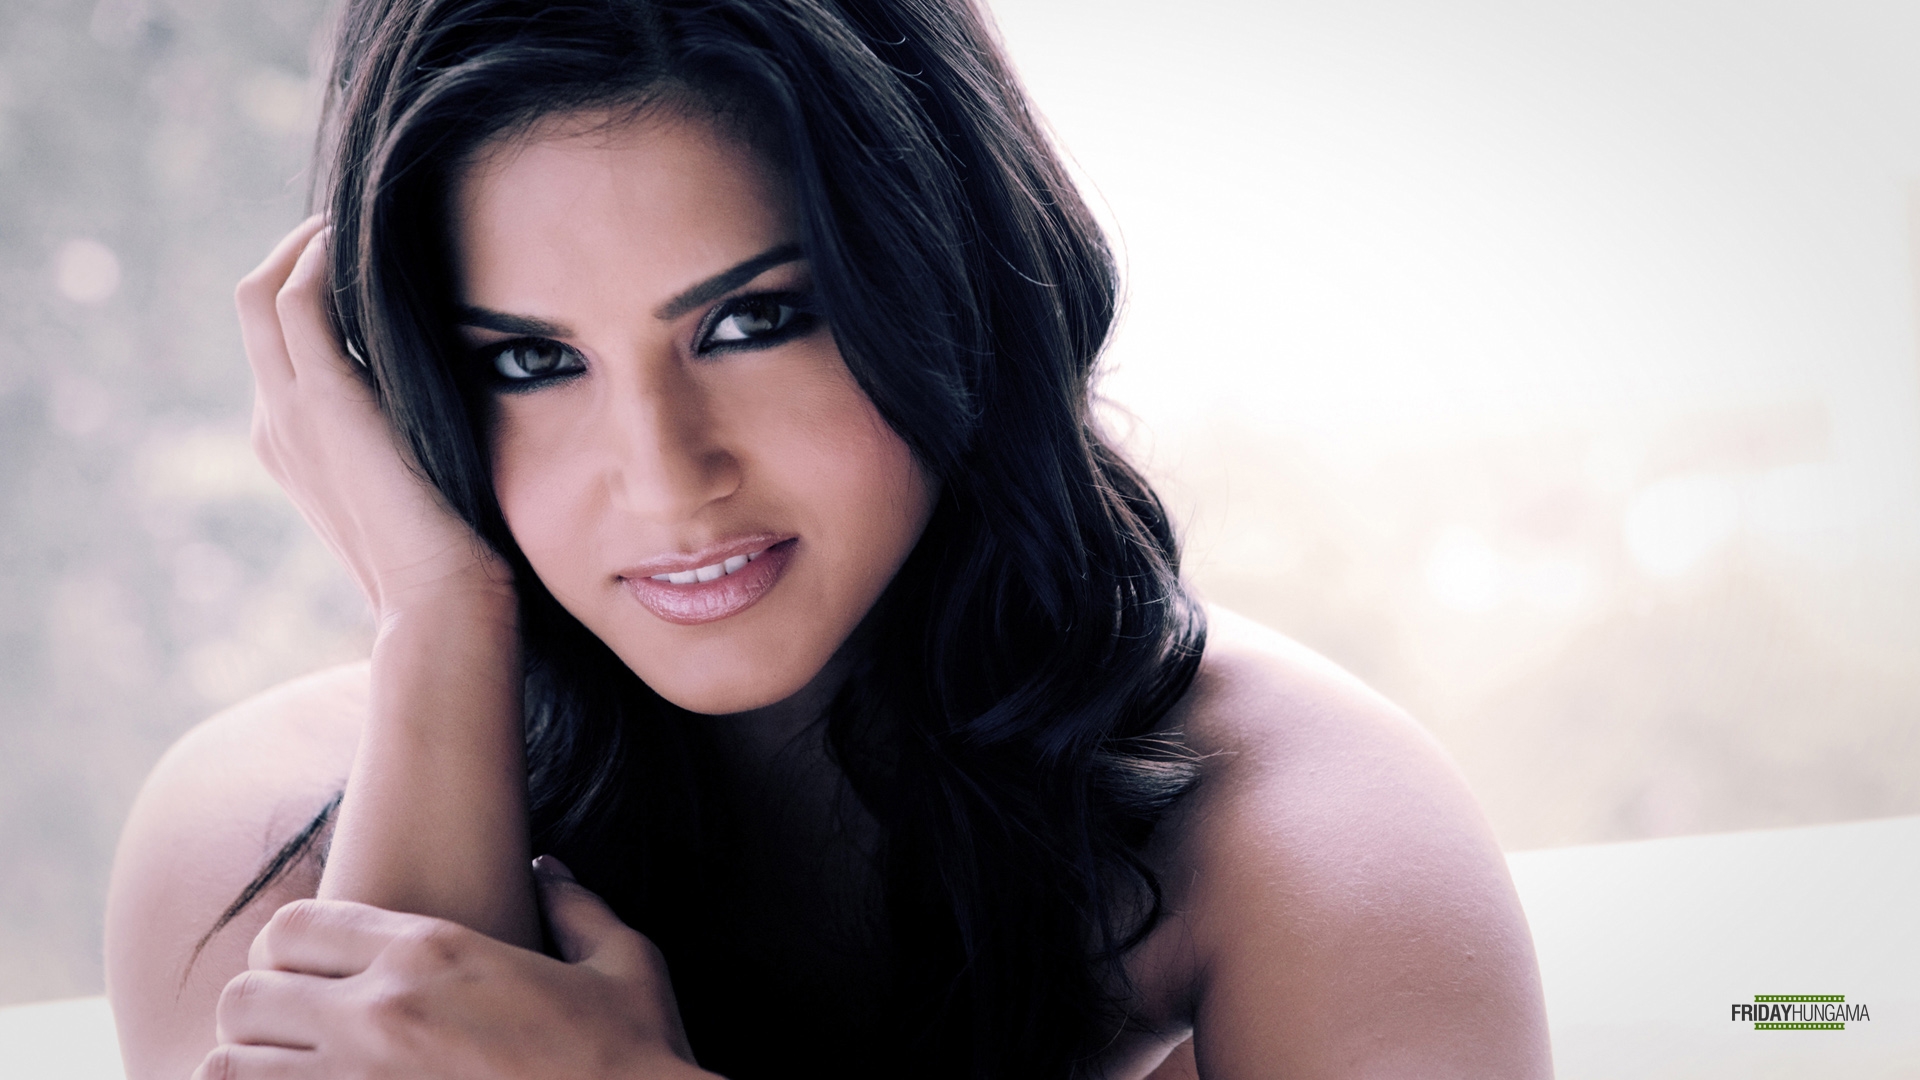 Sunny Leone Wallpapers on WallpaperDog